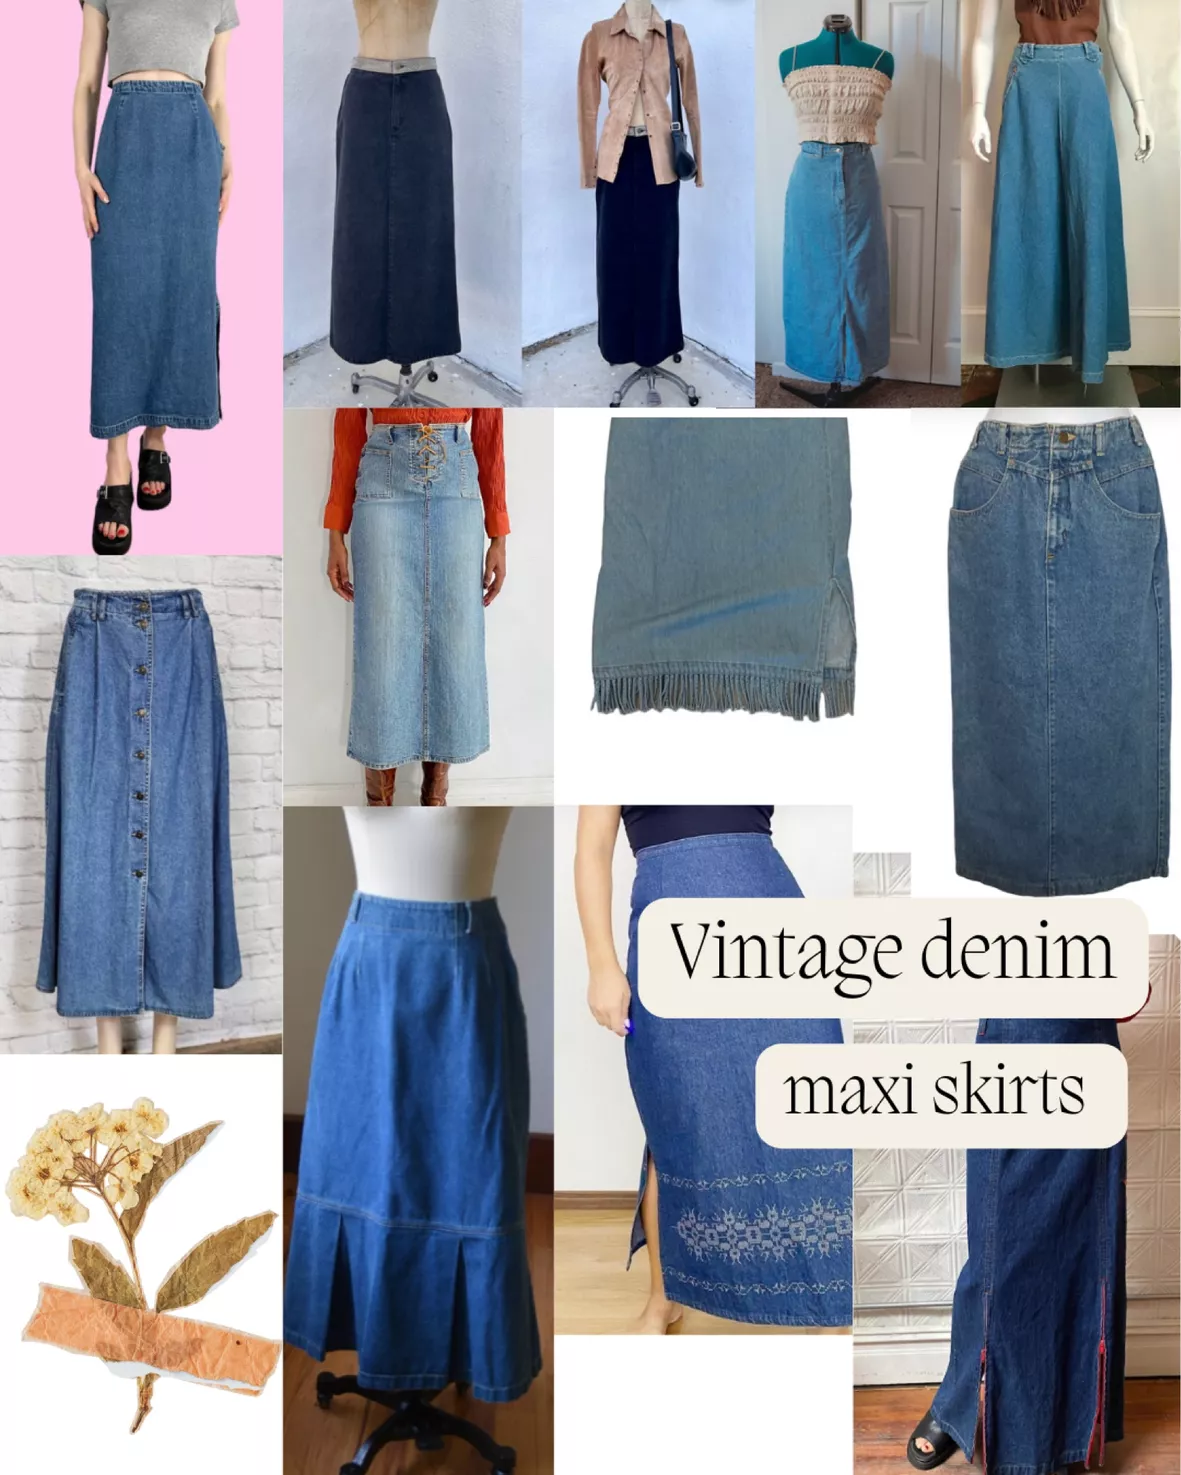 Y2K Jeans Skirt – Aesthetic Clothes Store